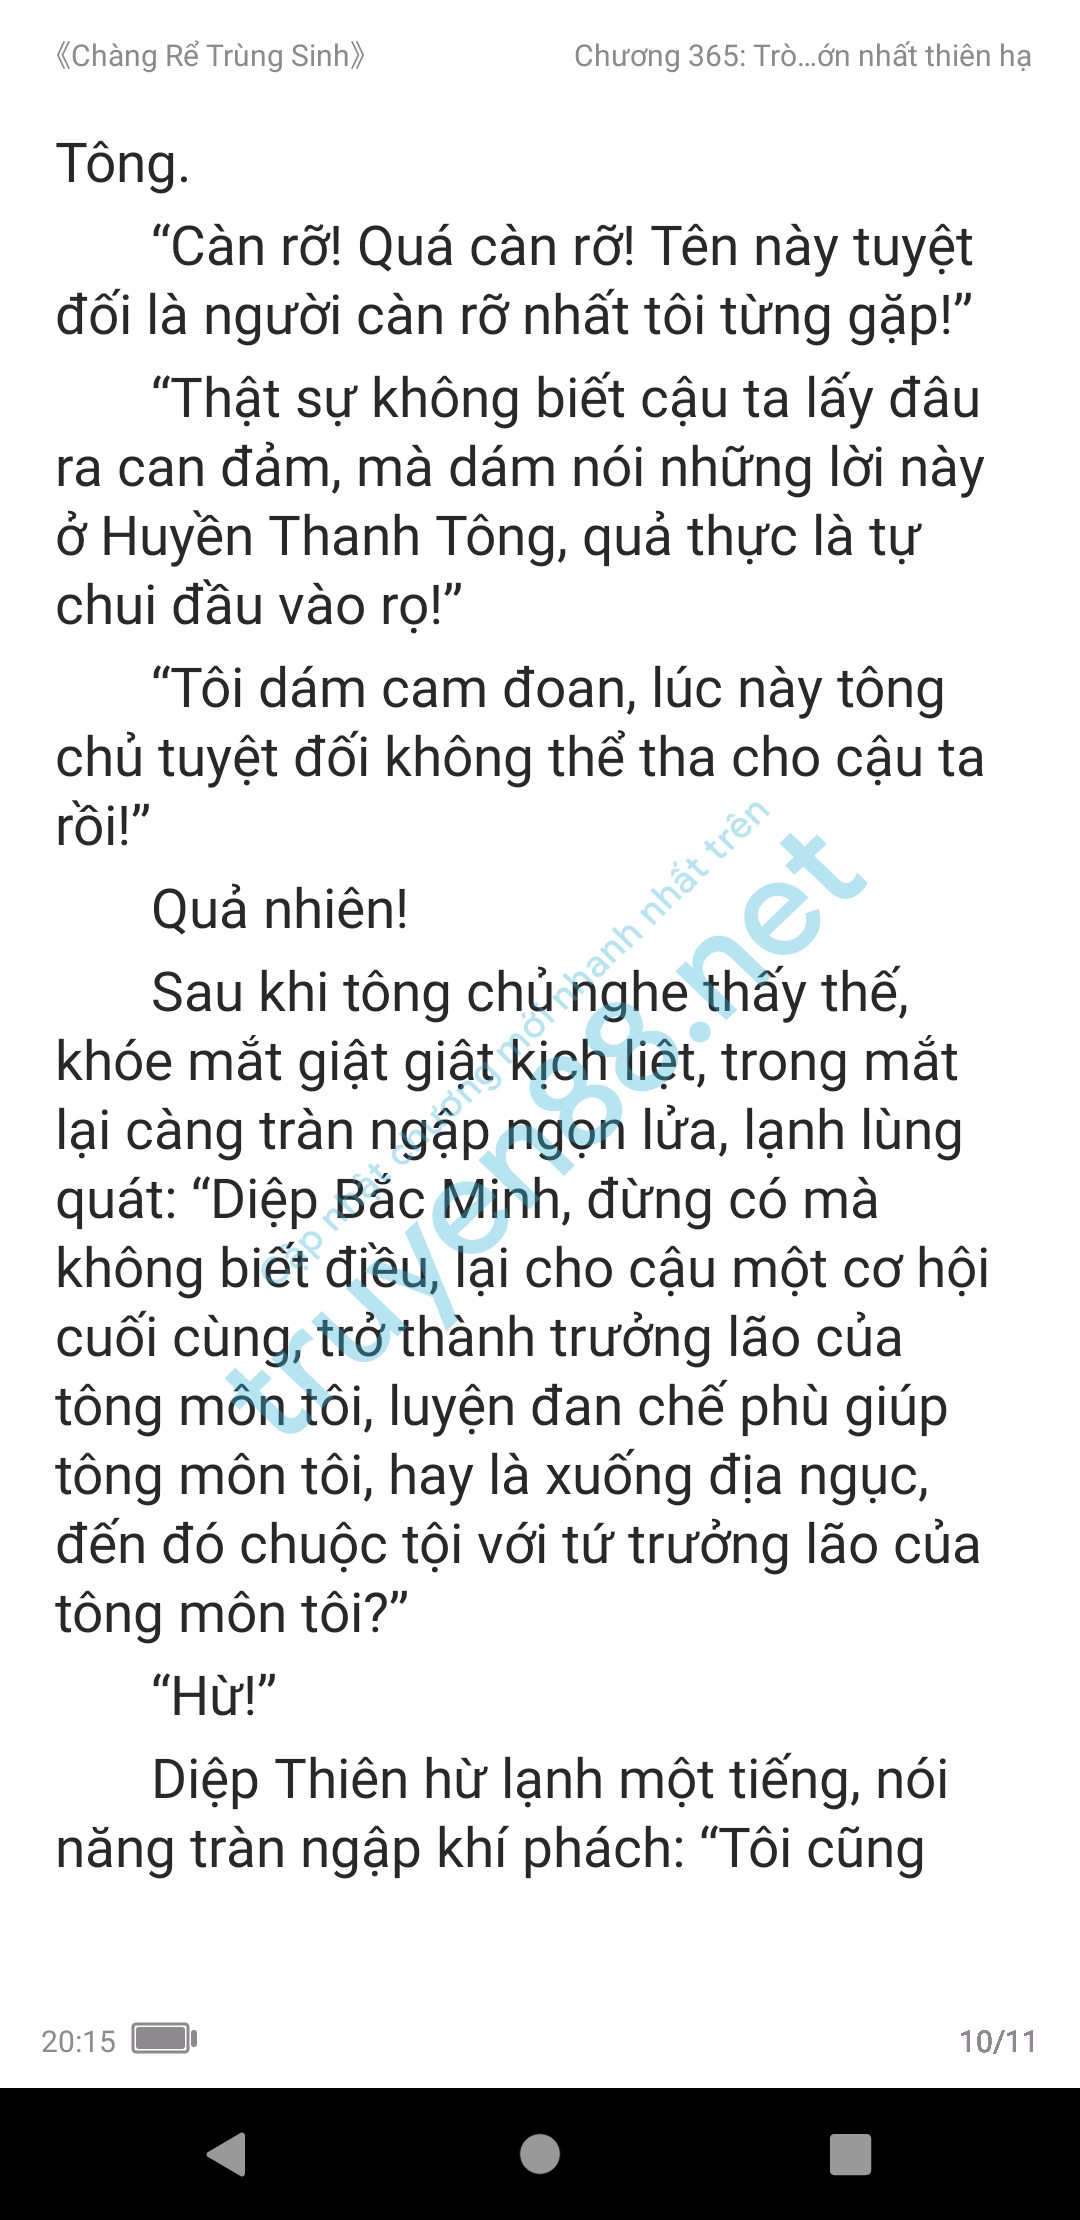 chang-re-trung-sinh-365-0